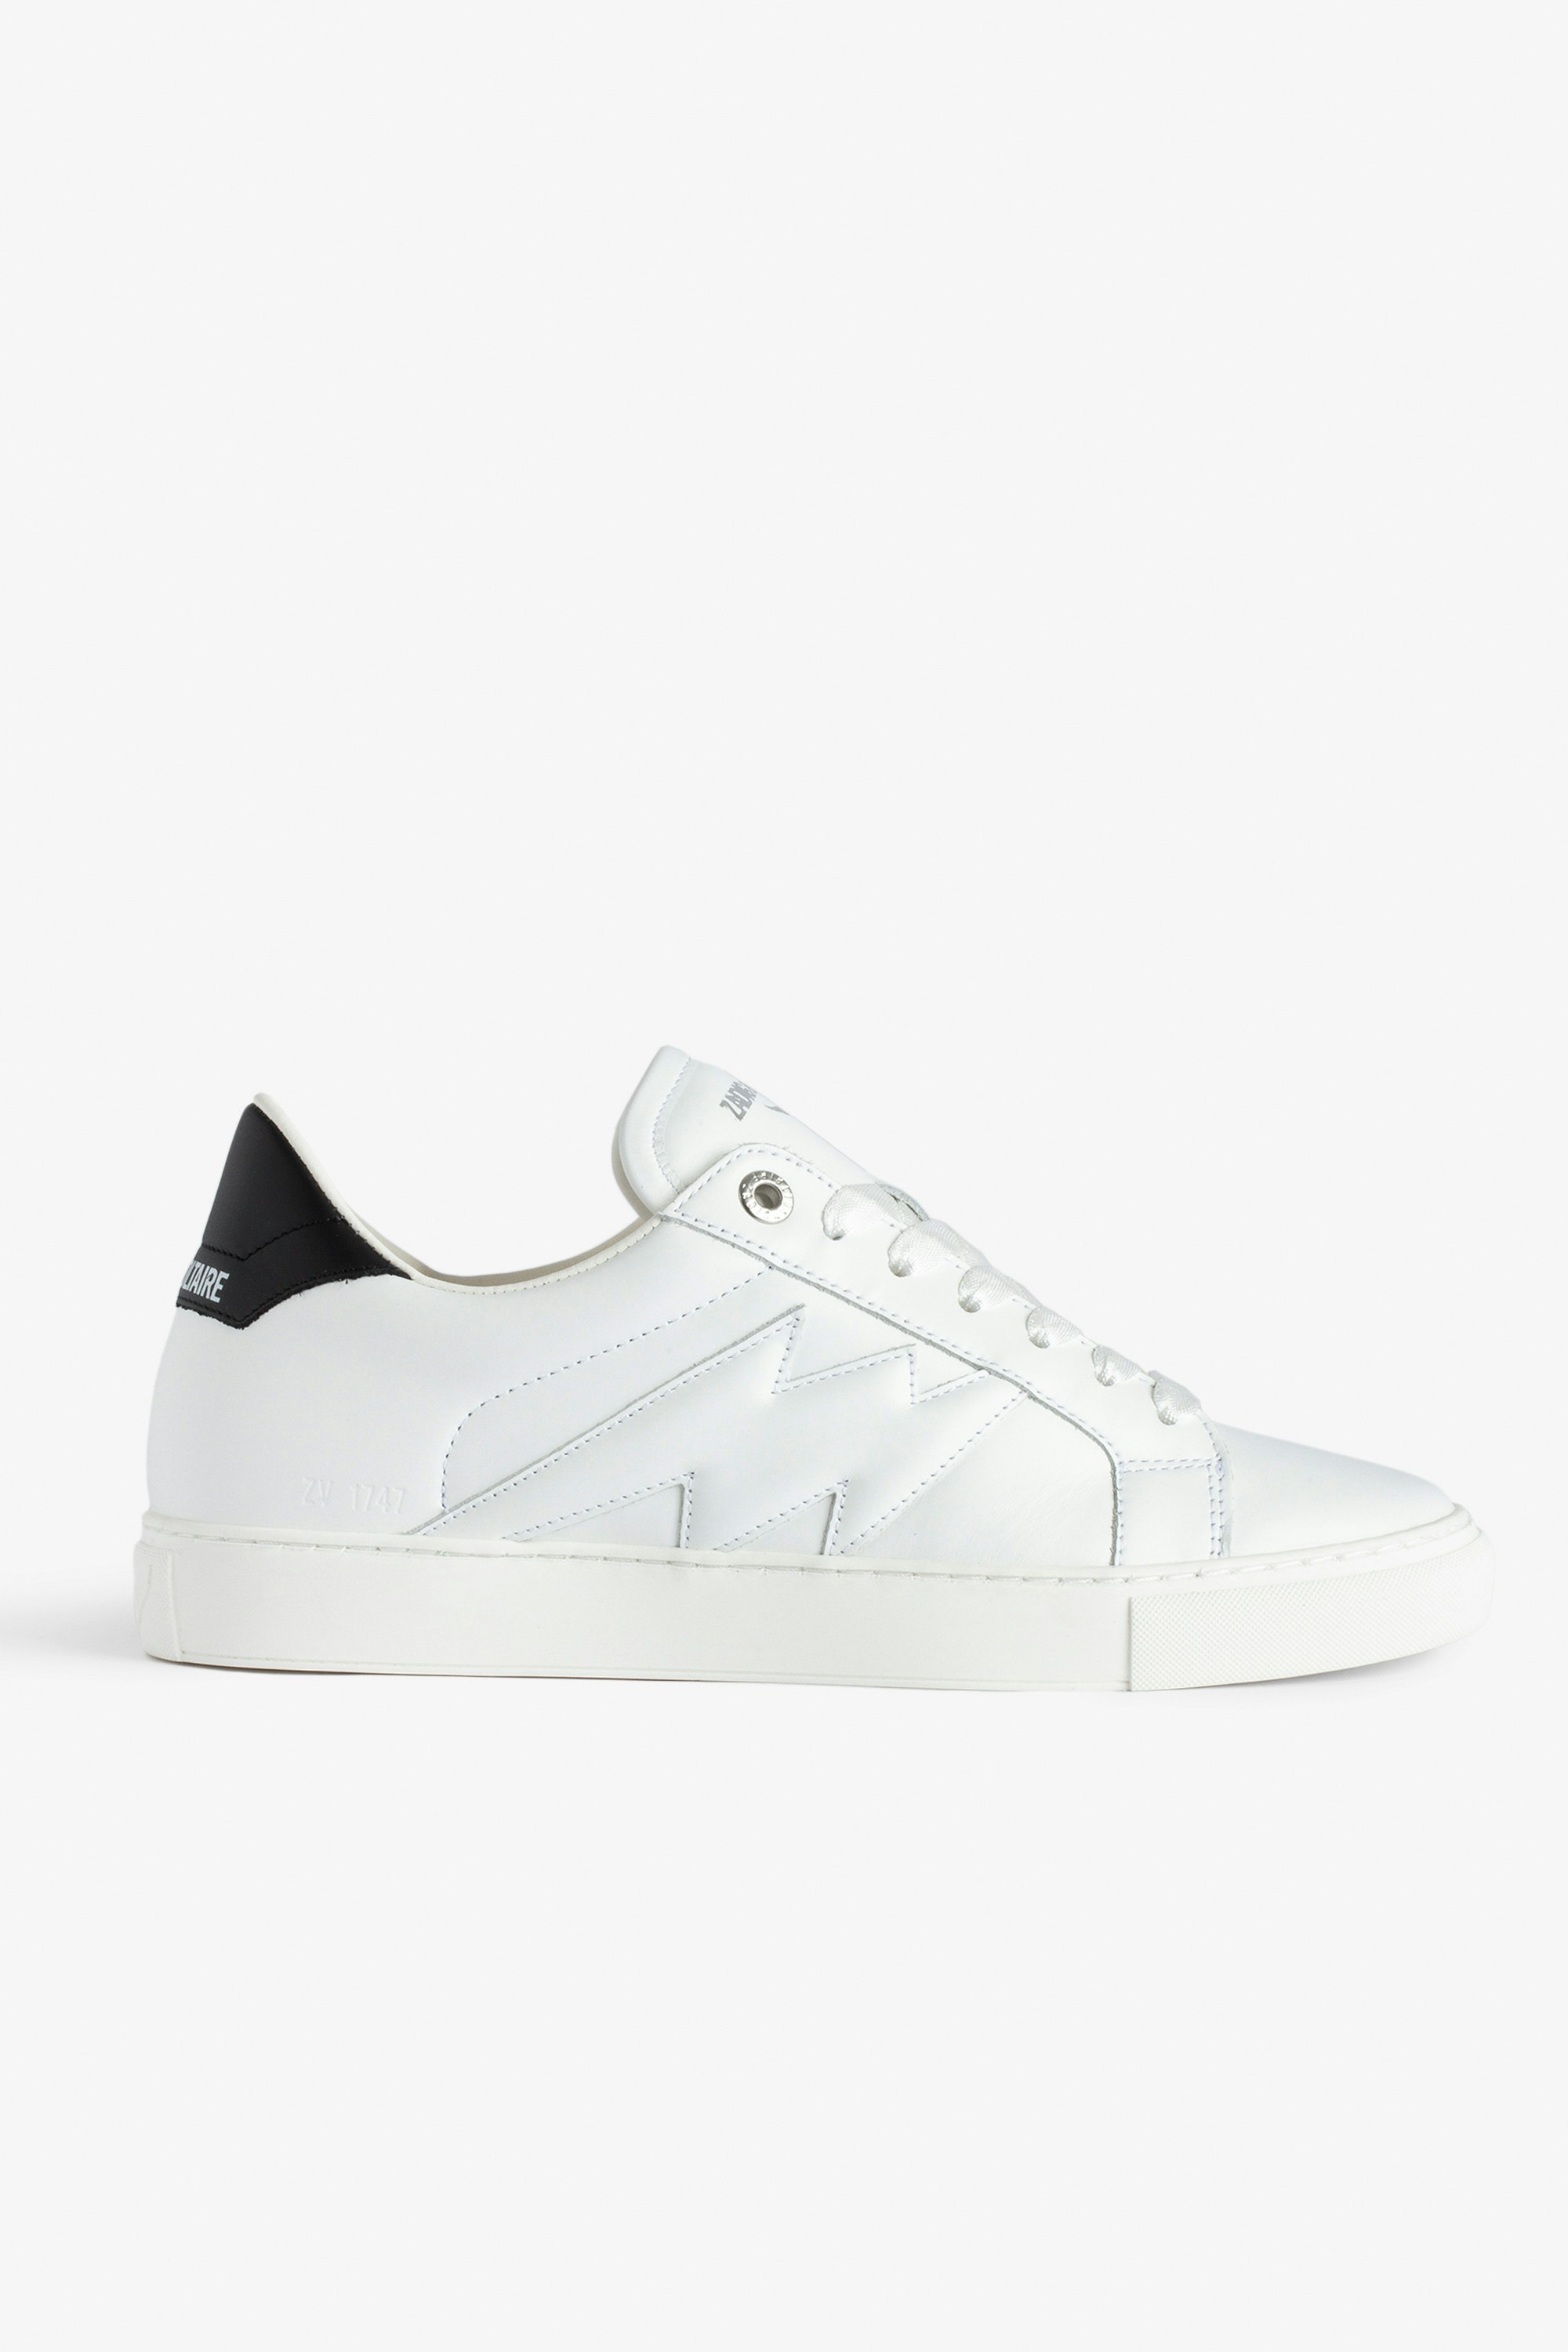 ZV1747 La Flash Low-Top Trainers Women’s white smooth leather low-top trainers with lightning bolt panels and contrasting reinforcement.